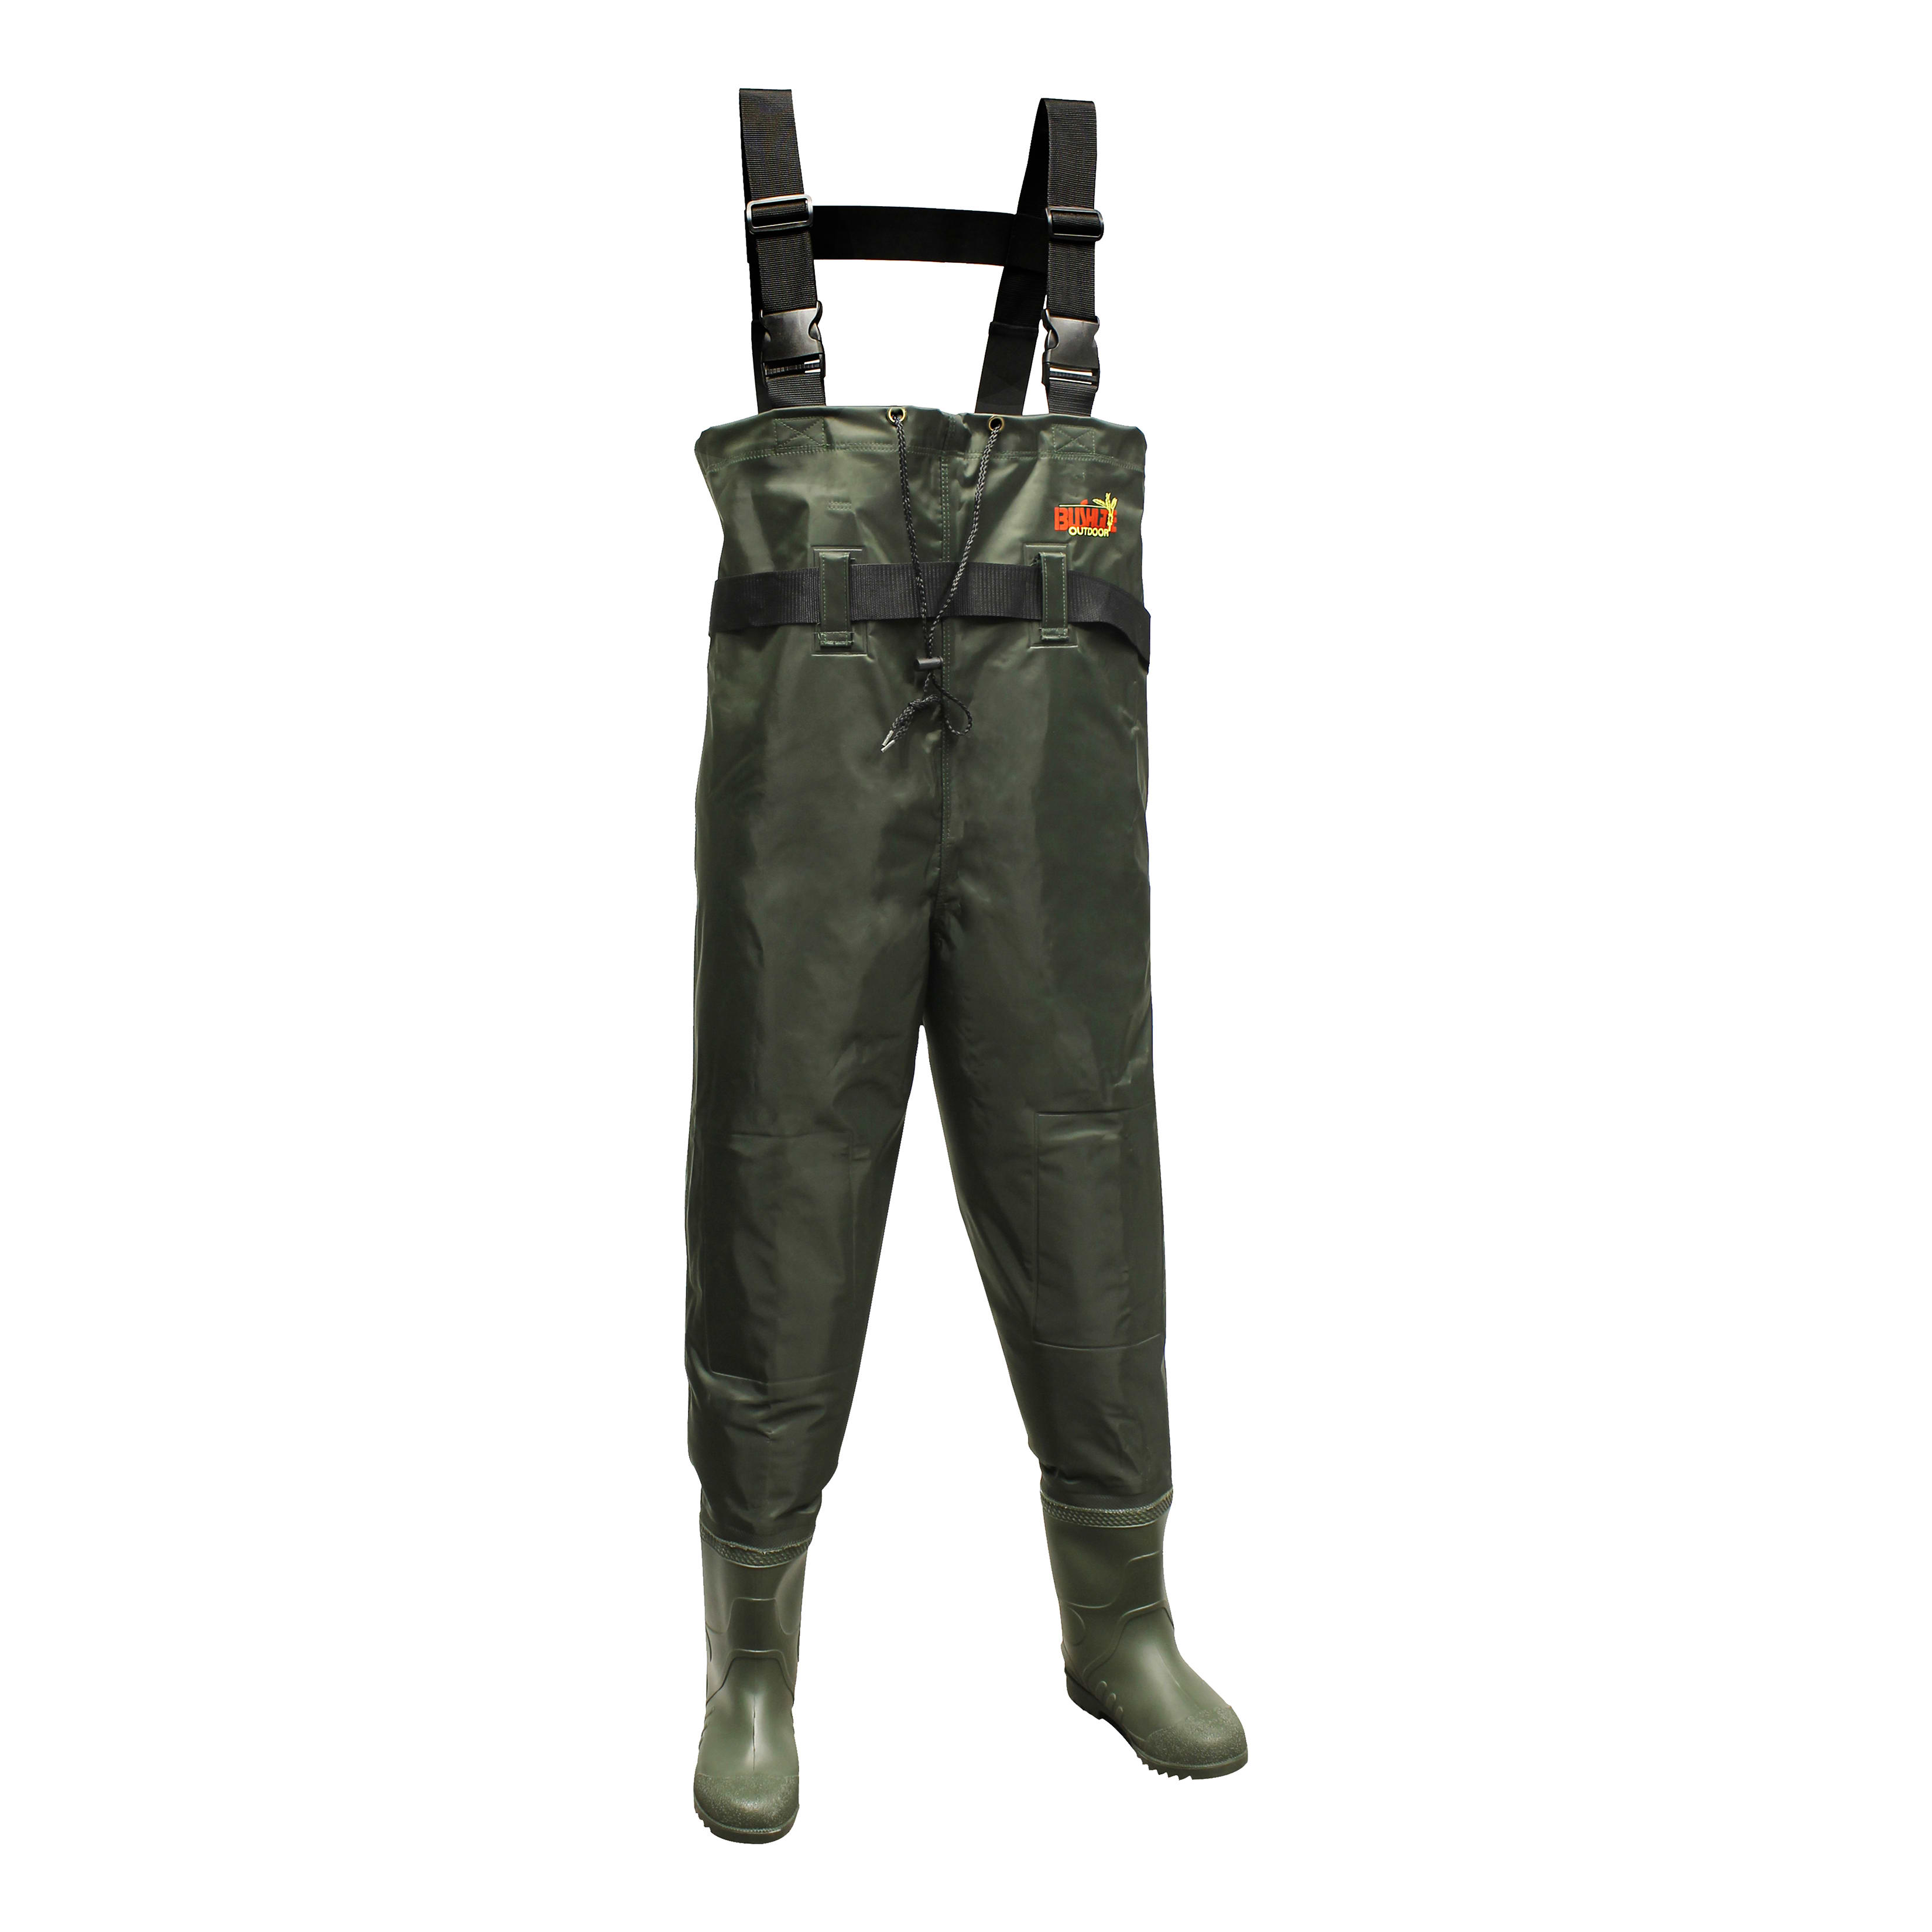 FISHINGSIR Fishing Waders for Men with Boots size 6 for Sale in Sacramento,  CA - OfferUp